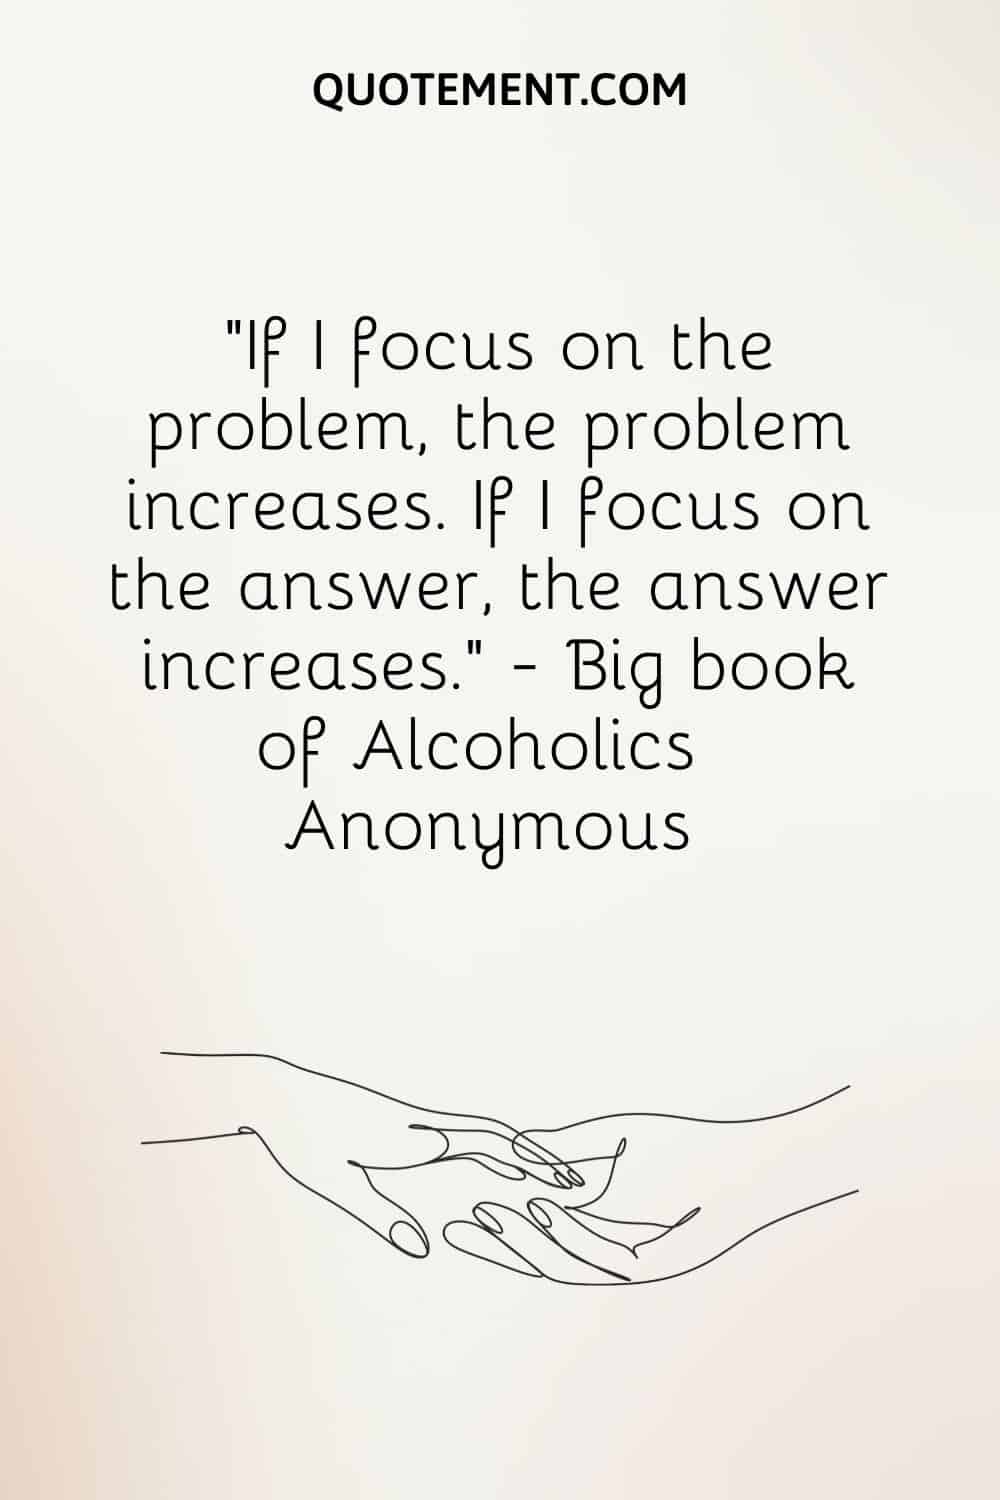 If I focus on the problem, the problem increases